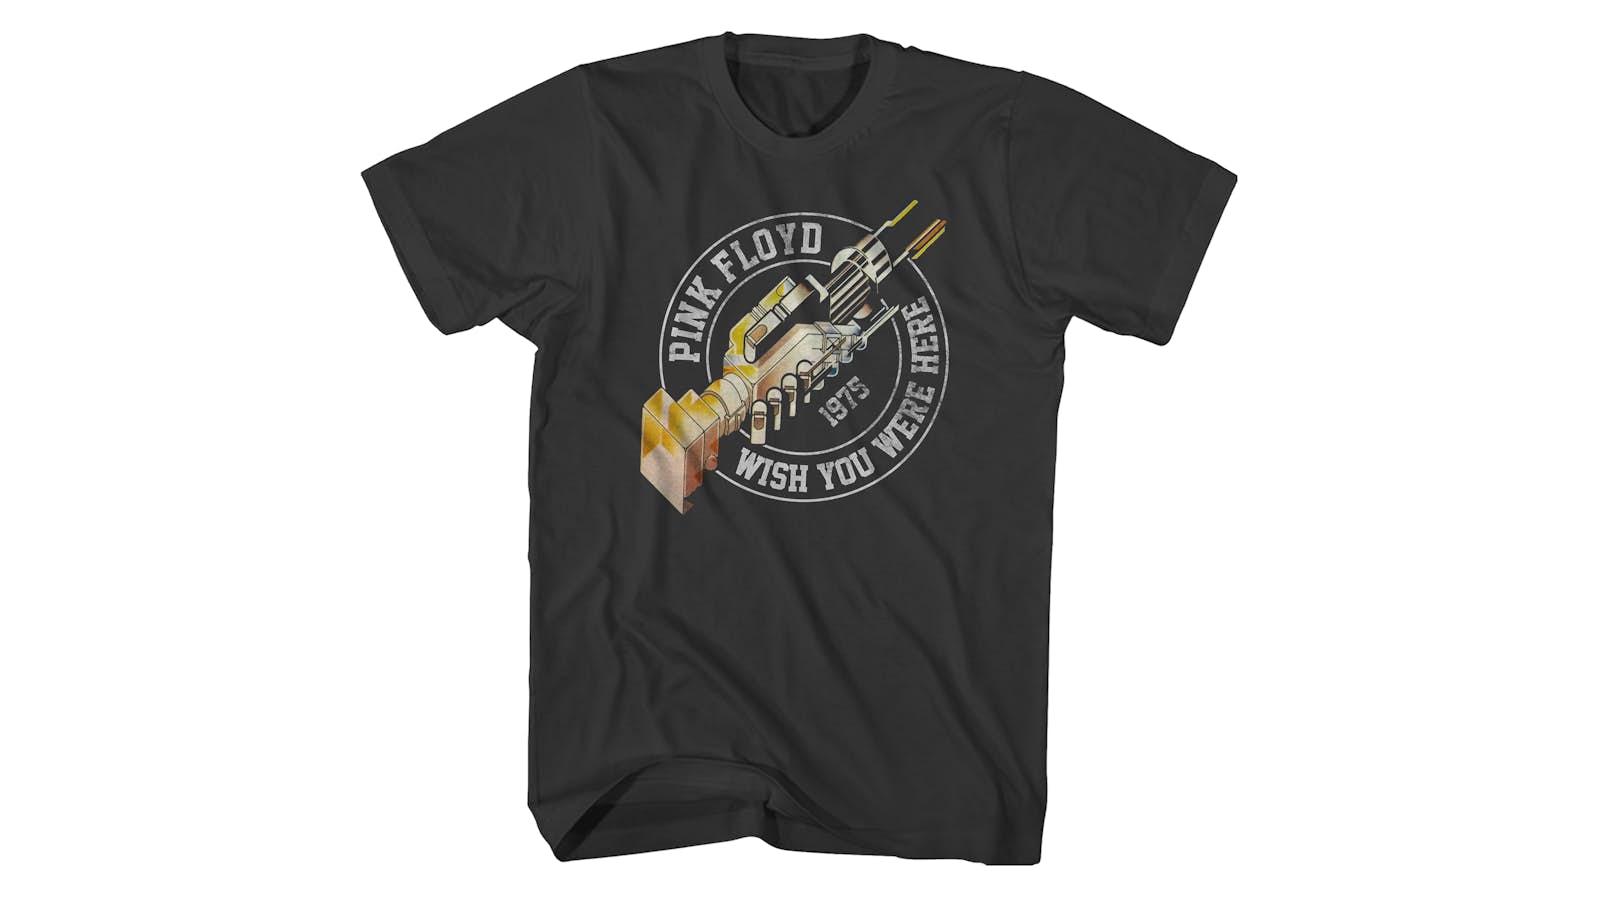 Pink Floyd T-Shirt | Wish You Were Here Tour '75 Pink Floyd Shirt (Reissue)